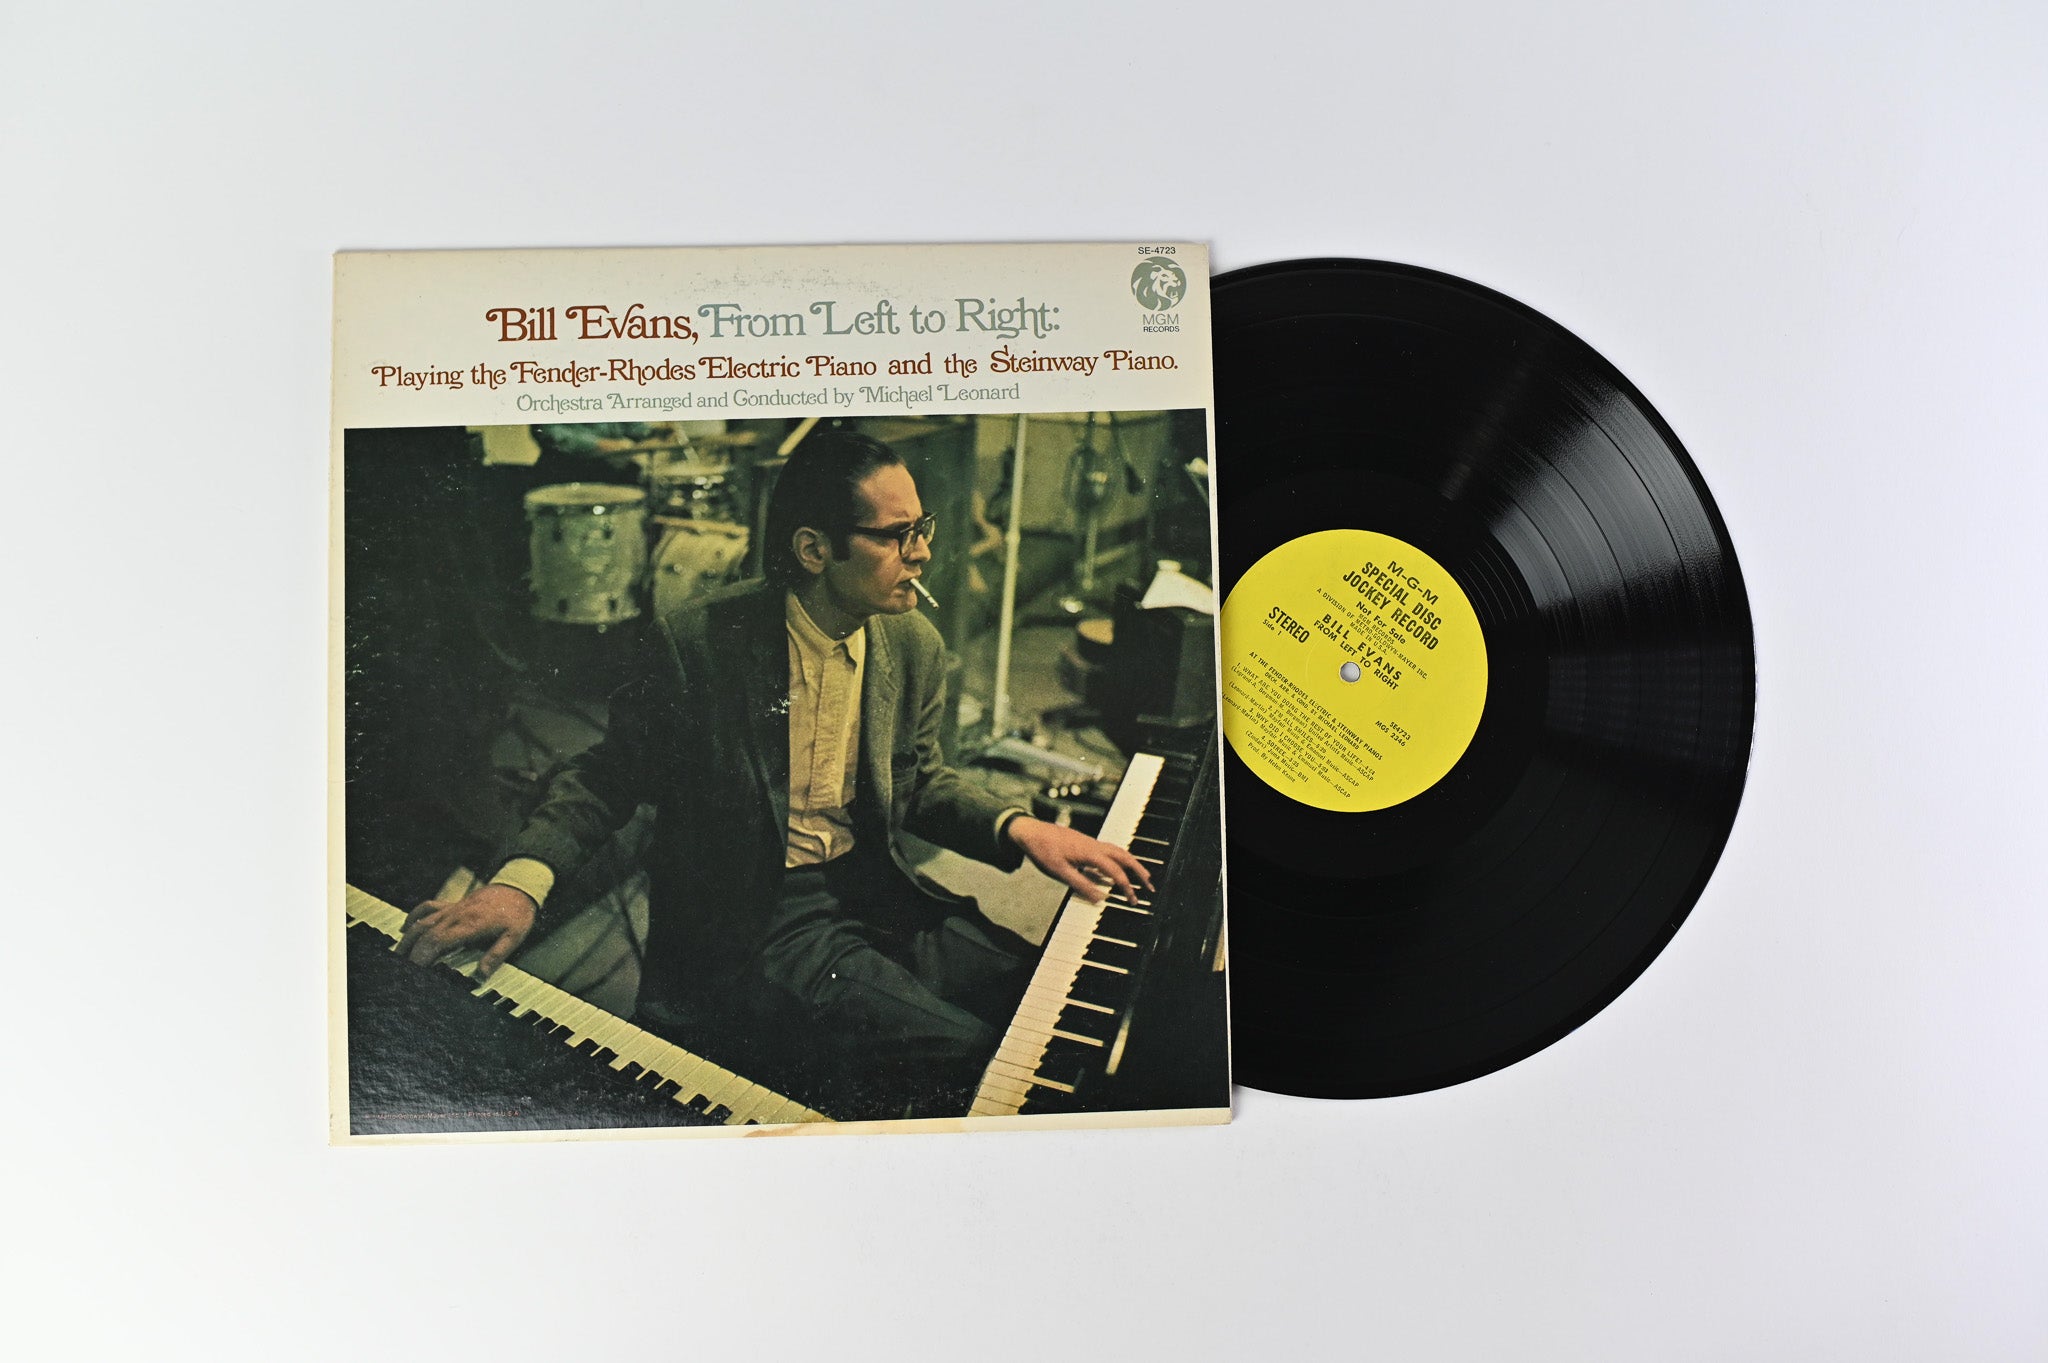 Bill Evans - From Left To Right on MGM Stereo Promo